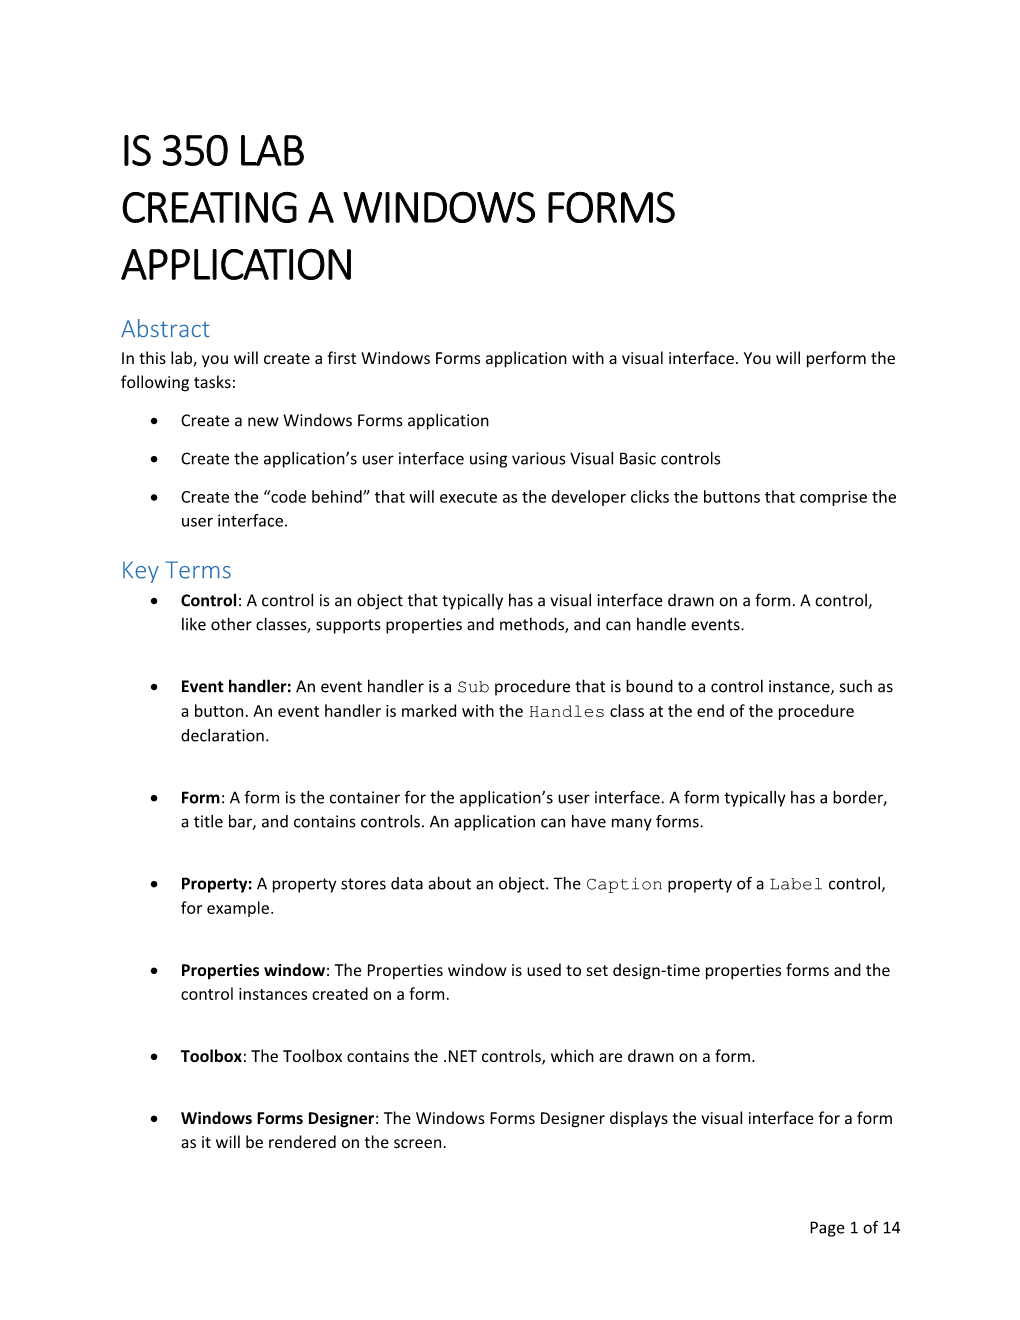 Is 350 Lab Creating a Windows Forms Application